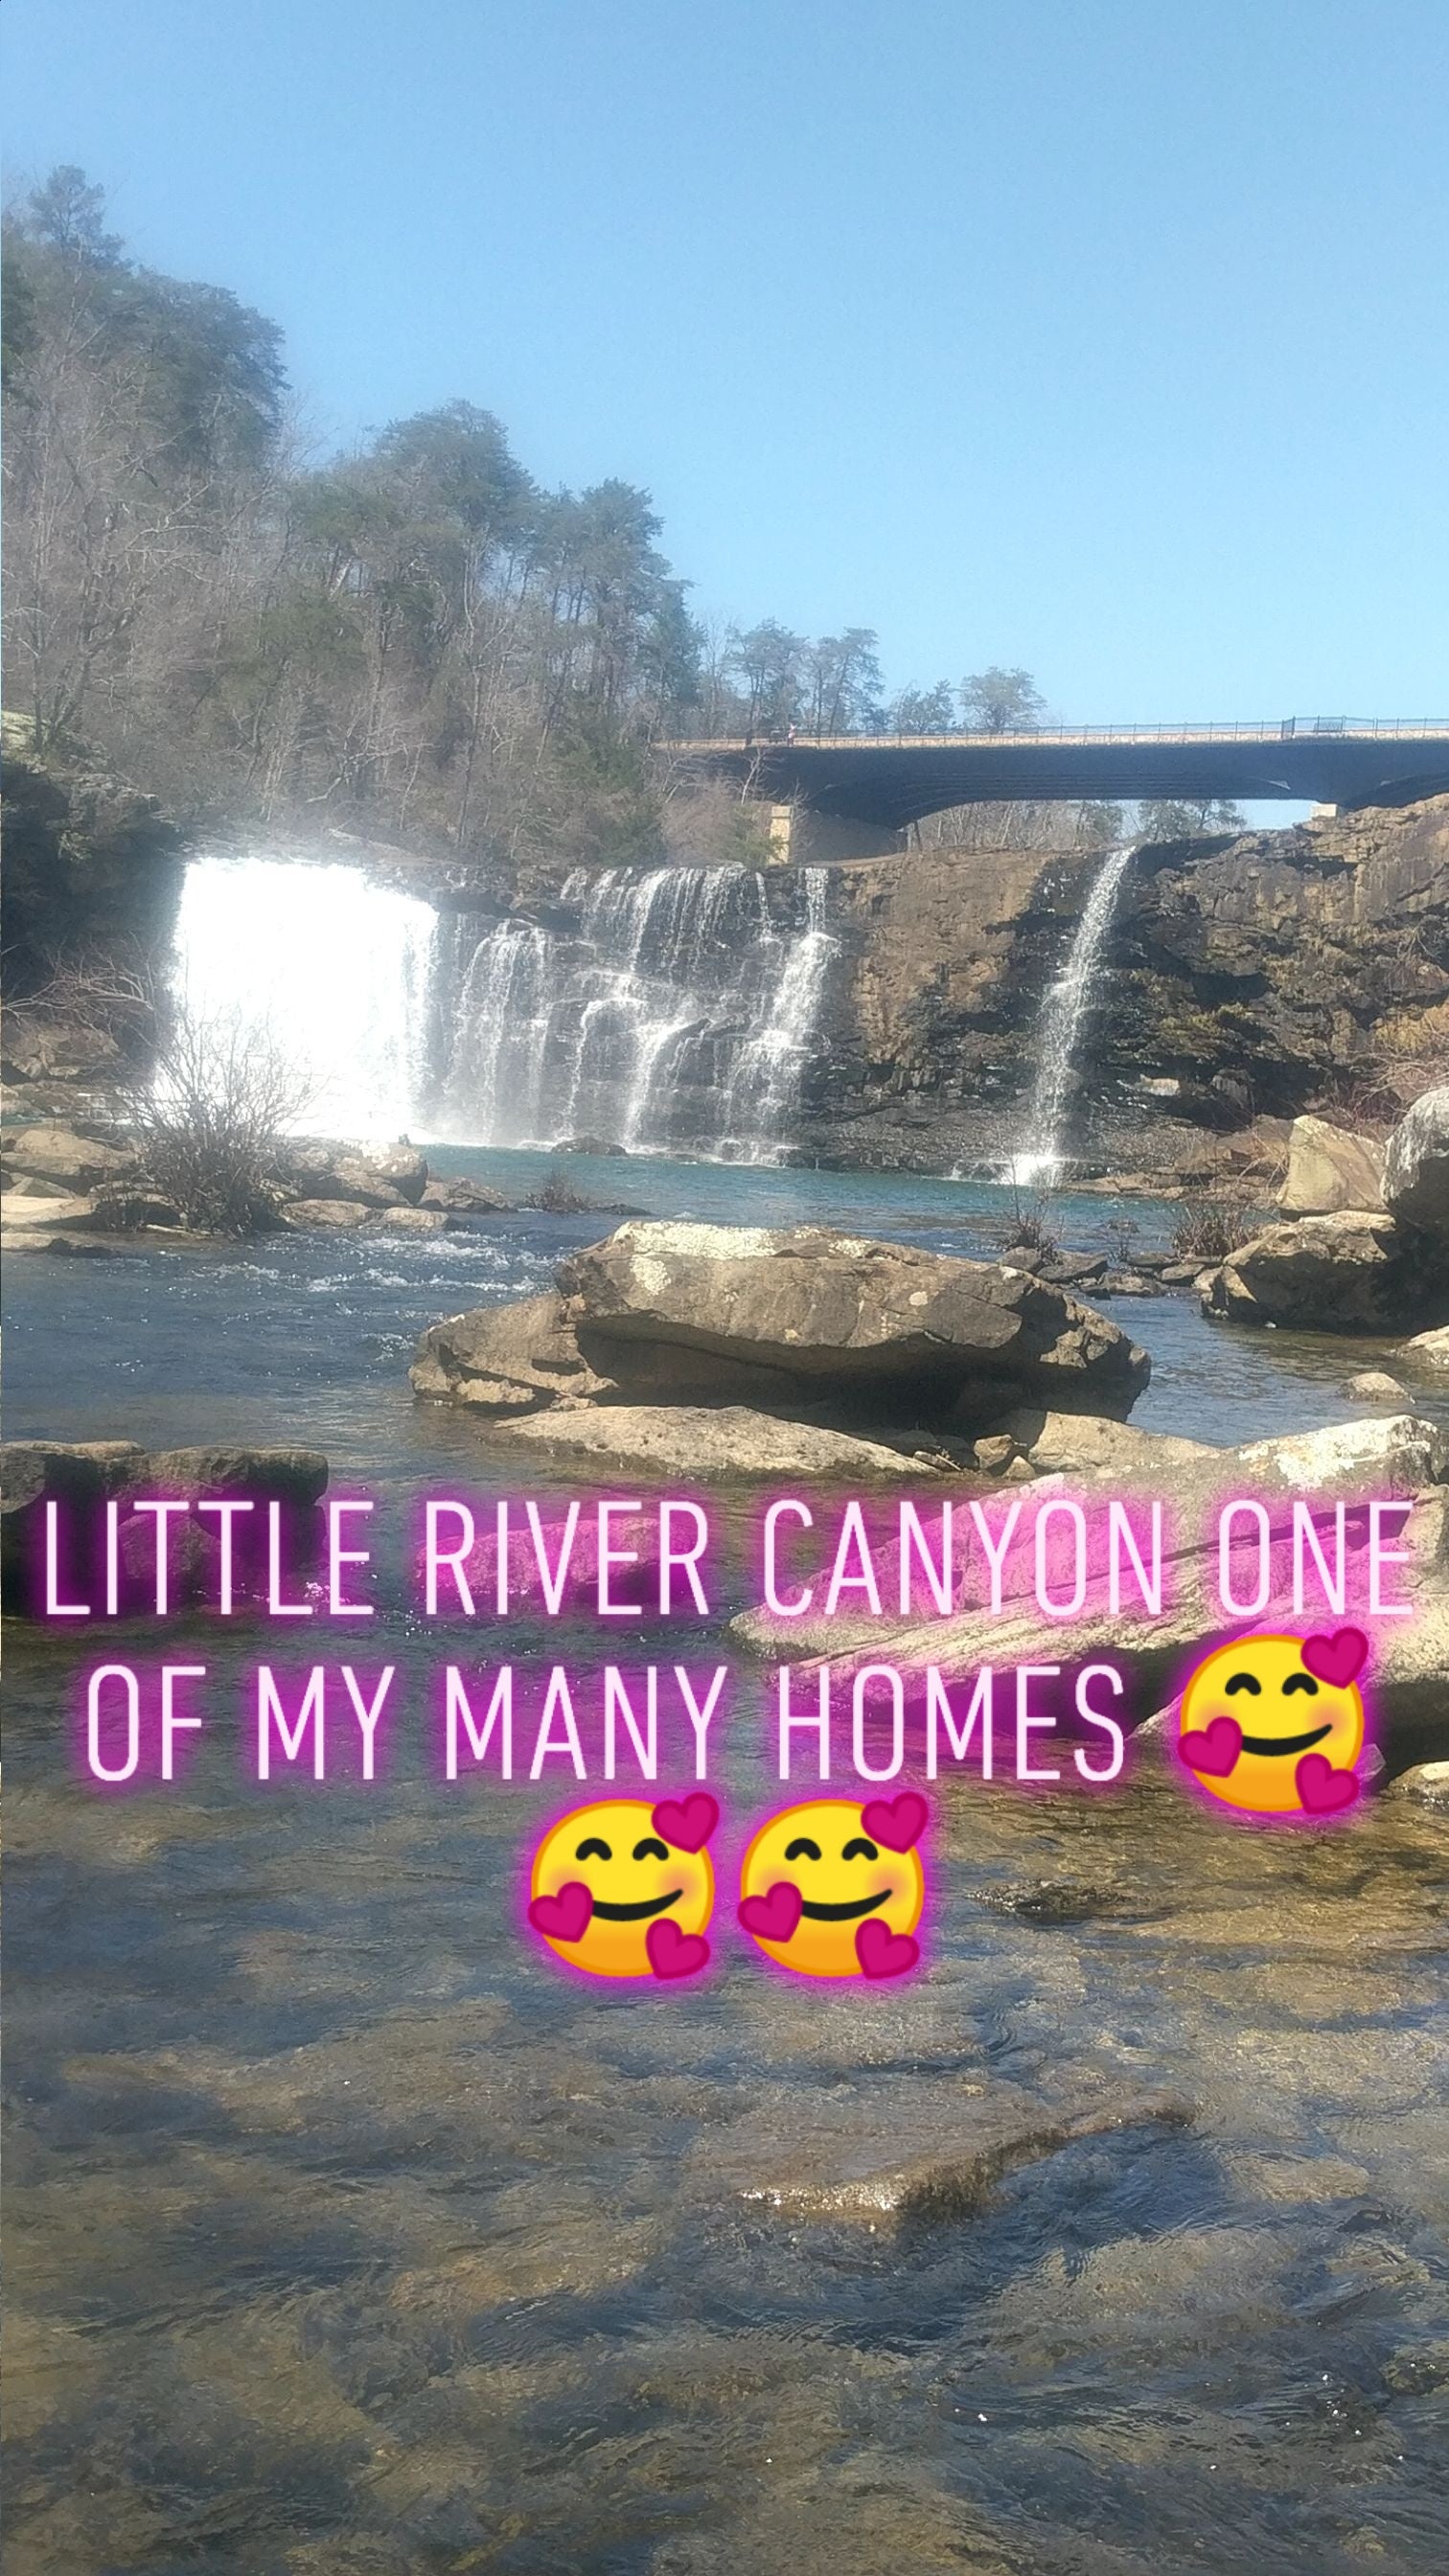 The big falls at little river canyon right down the road.